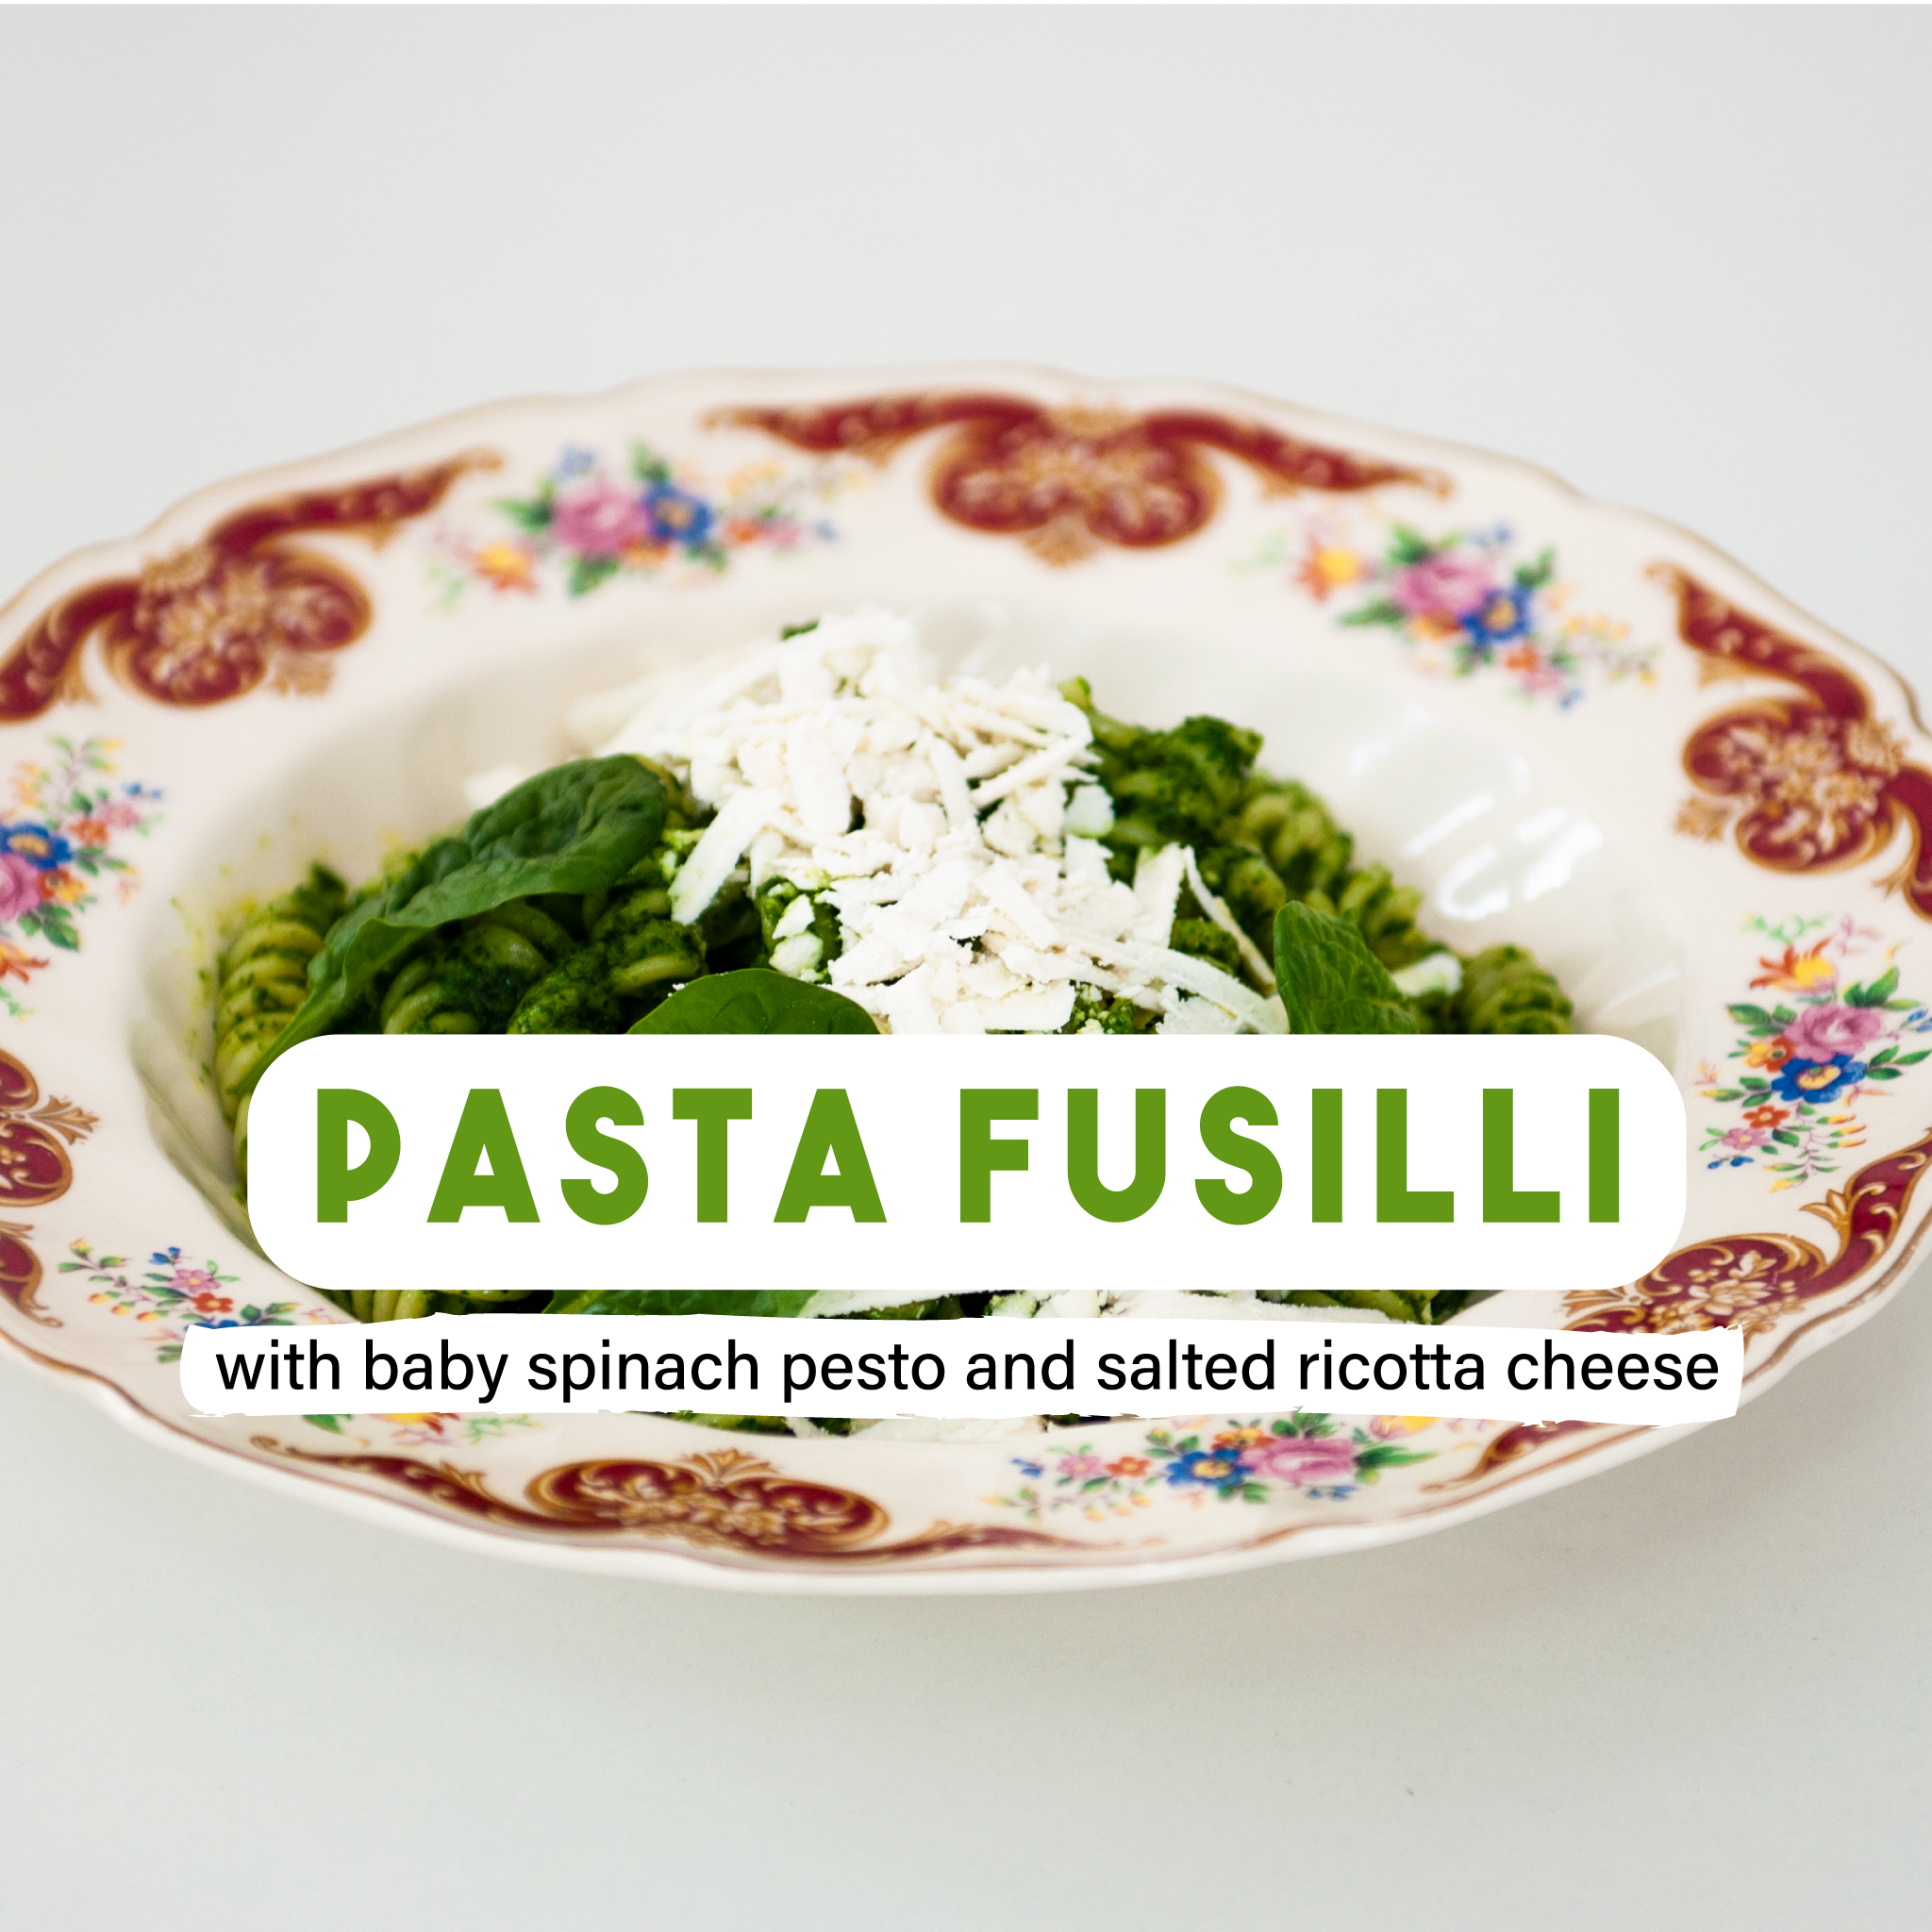 Pasta Fusilli with baby spinach pesto and salted ricotta cheese